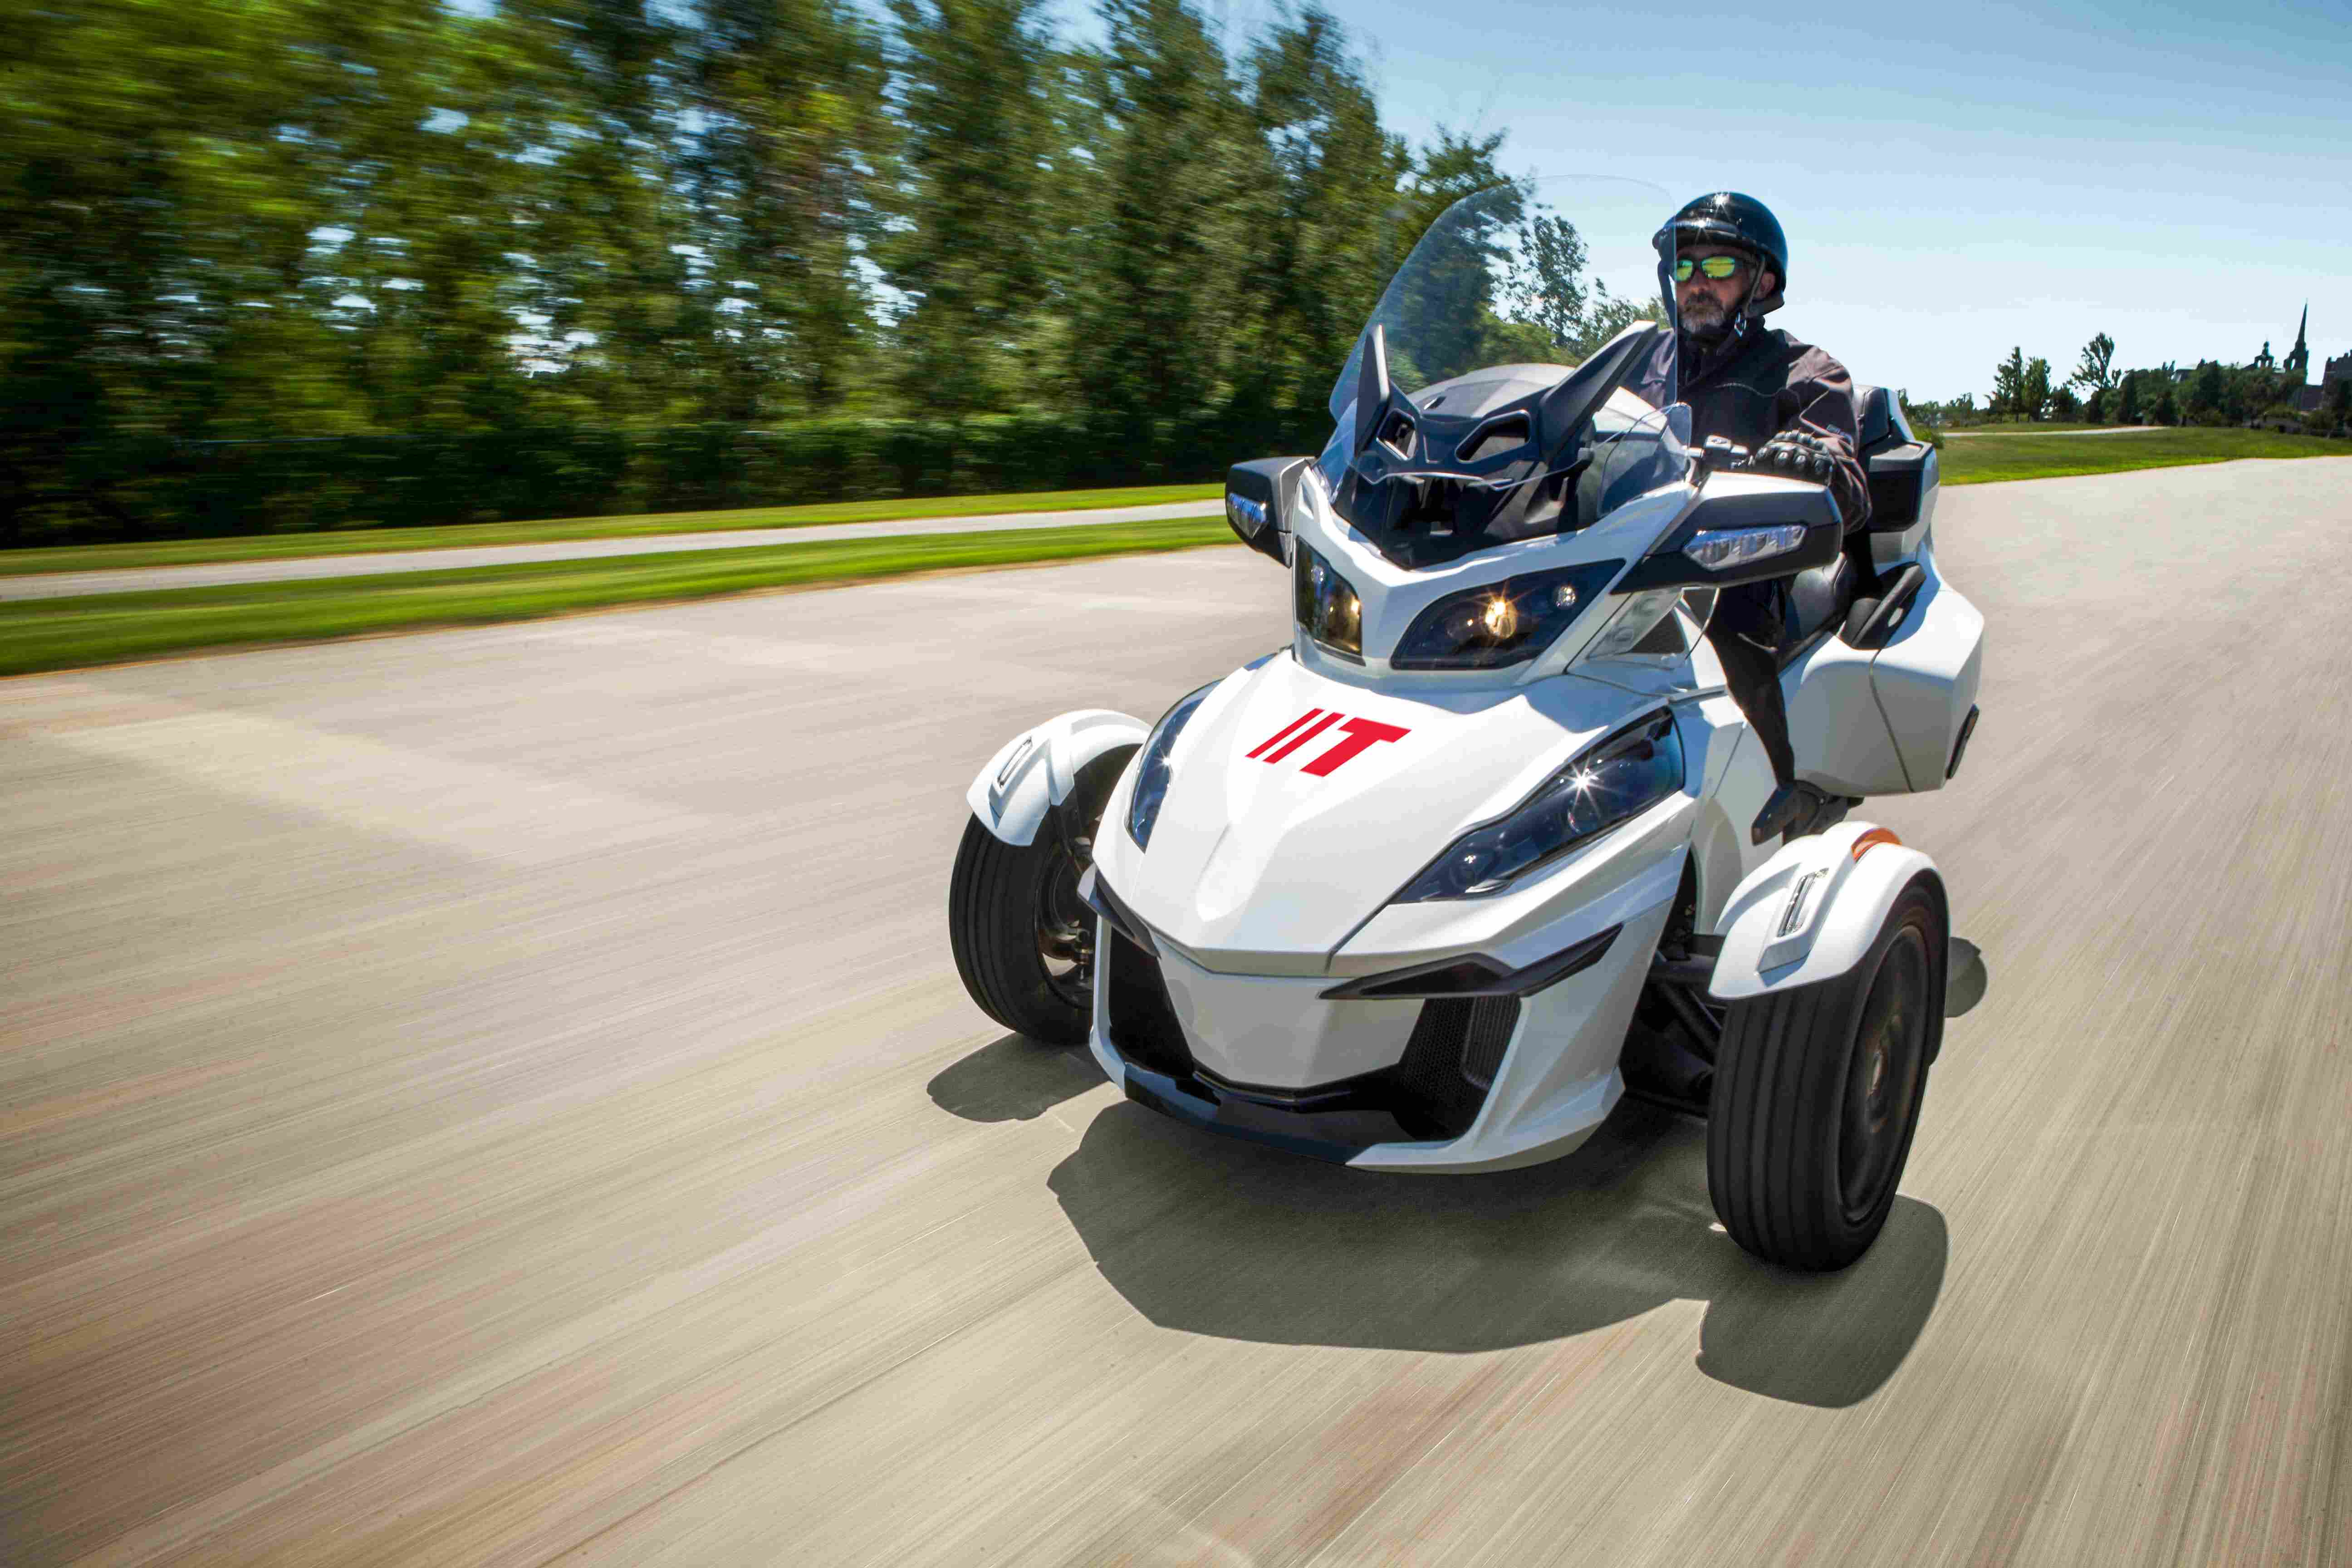 Discover the passion of a Three Wheeled motorcycle with Tecnic.